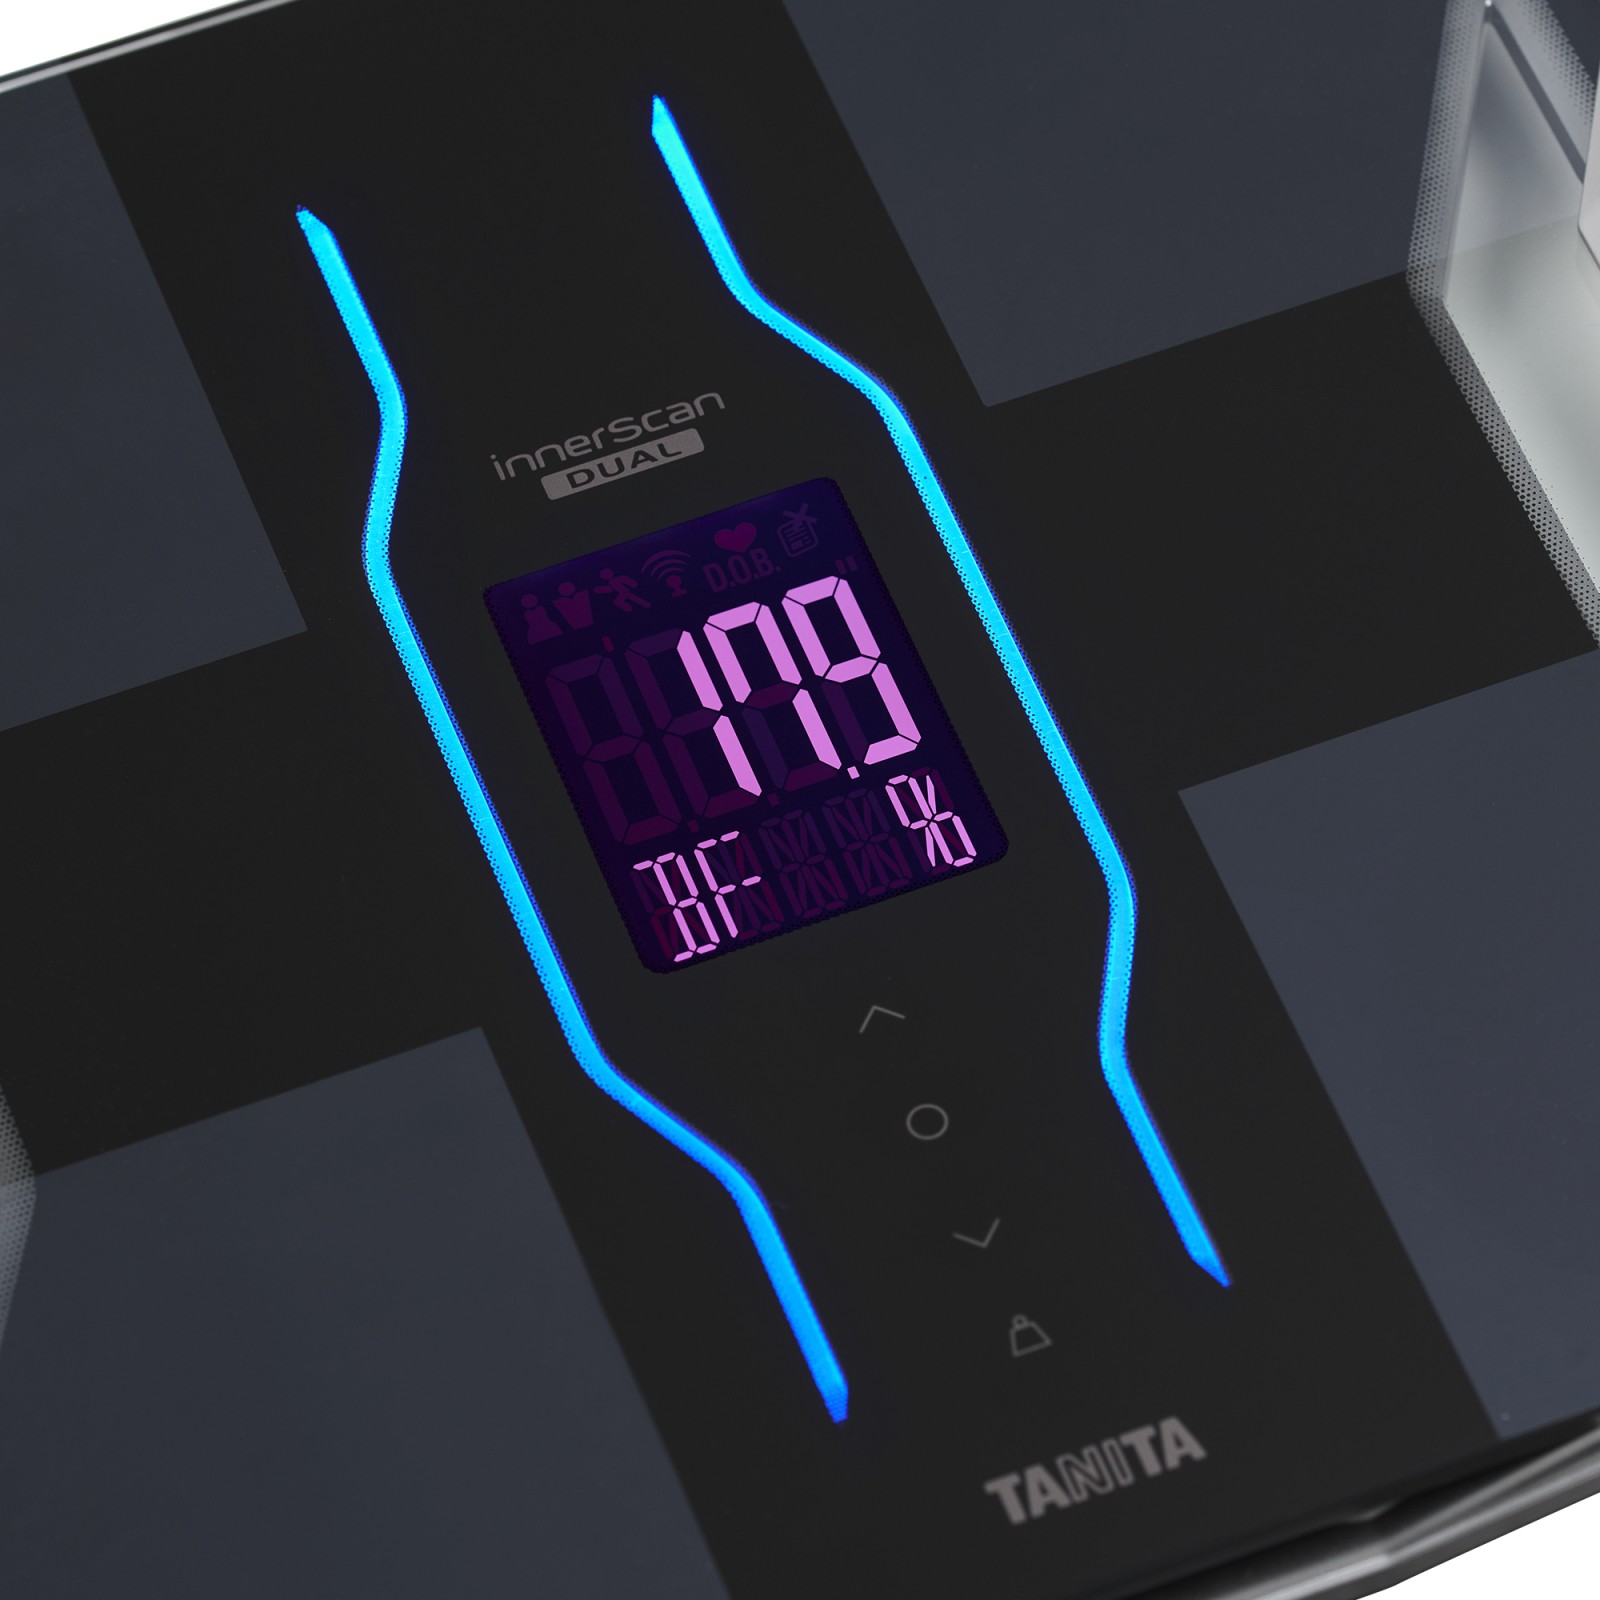 RD-953 body analysis scale Bluetooth